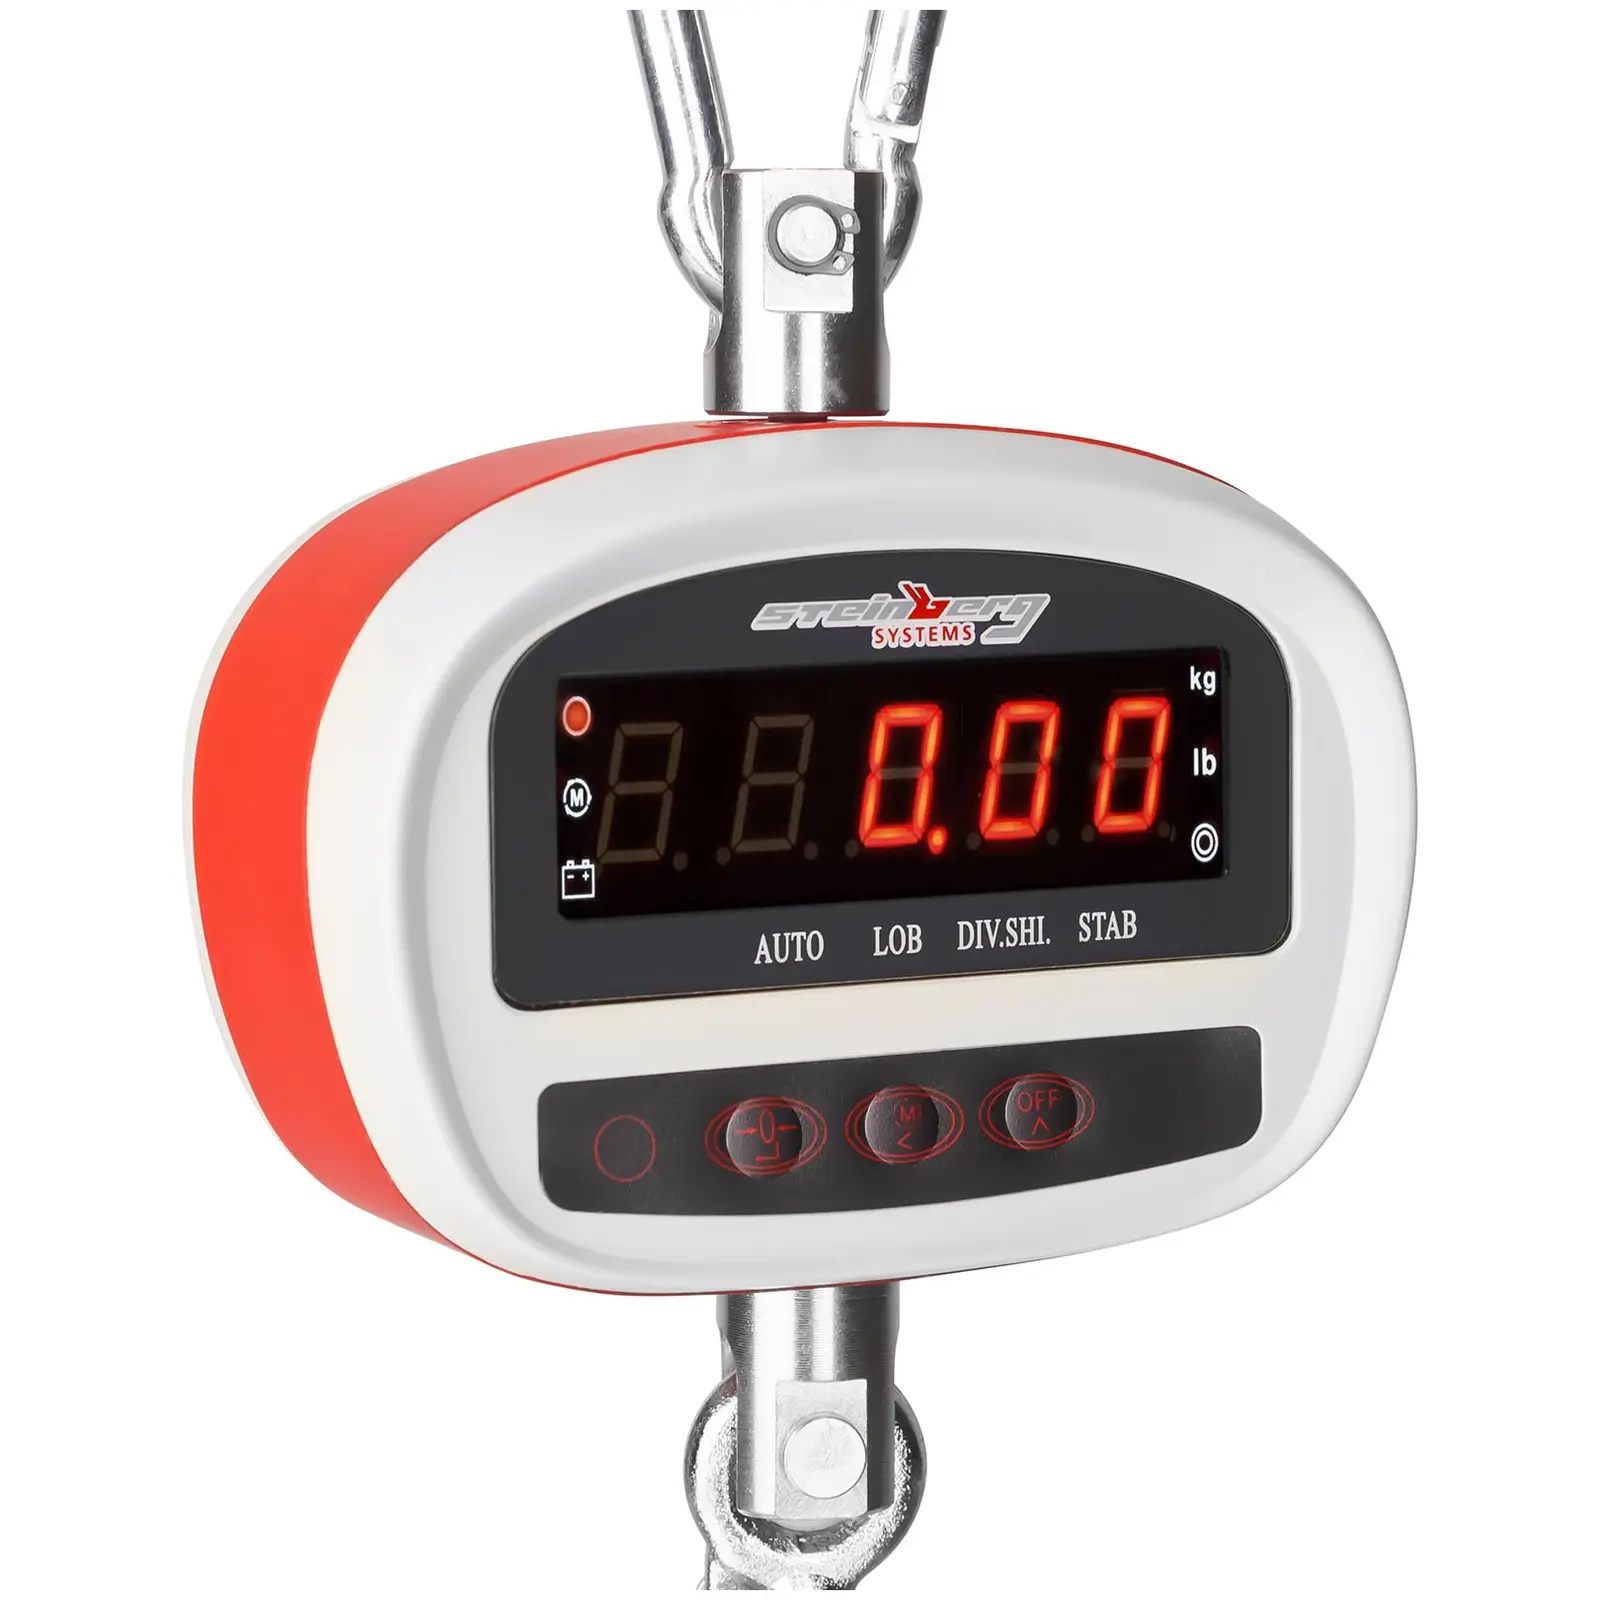 Crane Scale up to 300 kg - hanging scale - industrial scale - digital